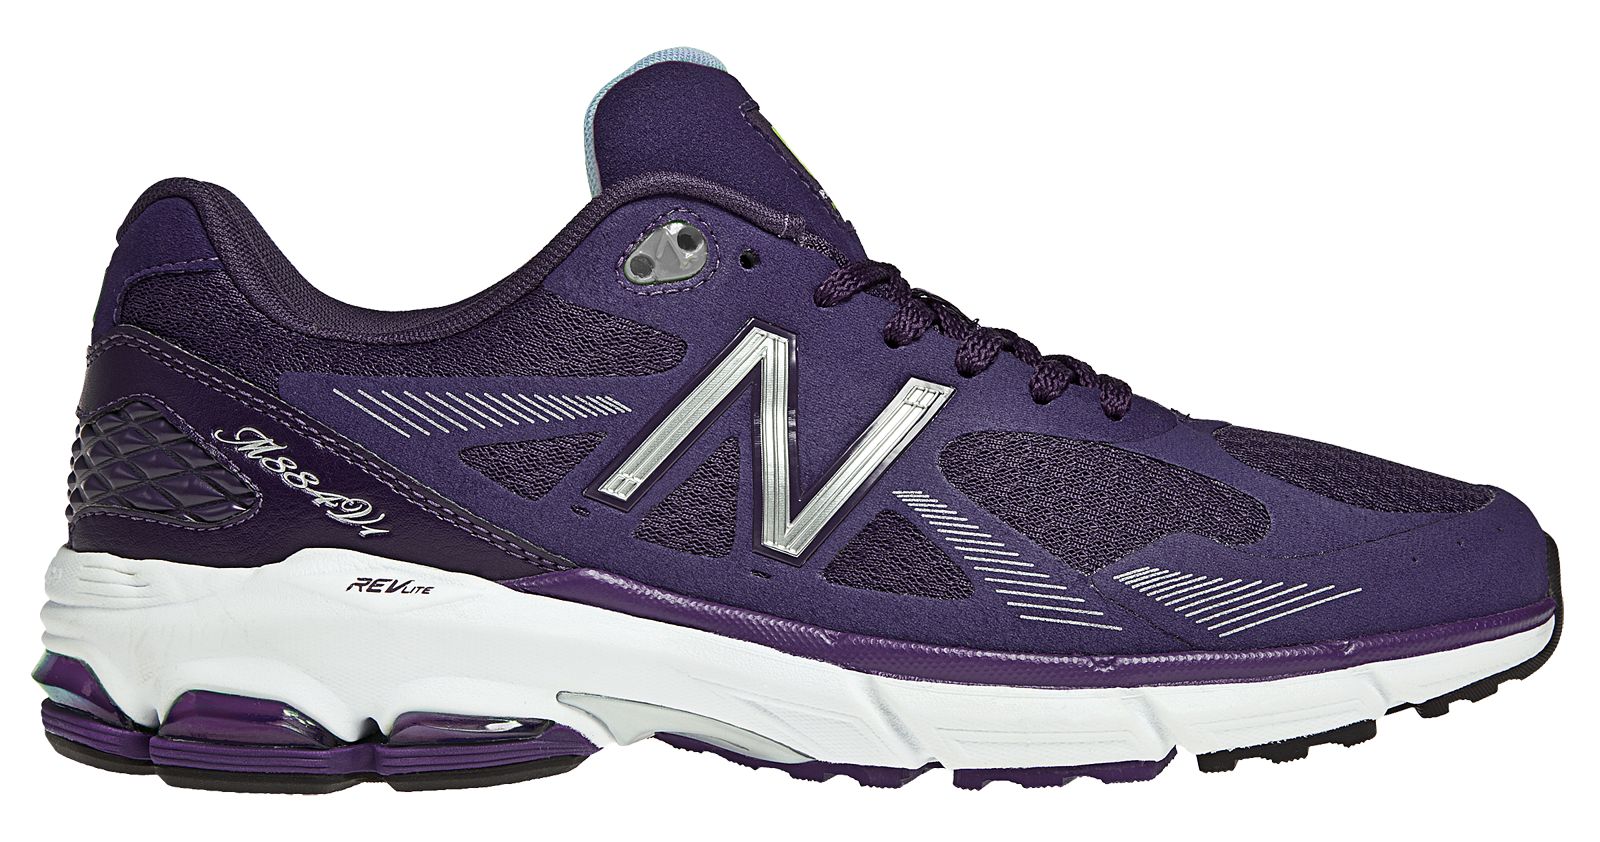 New Balance M884 on Sale - Discounts Up to 54% Off on M884PU1 at Joe's New  Balance Outlet